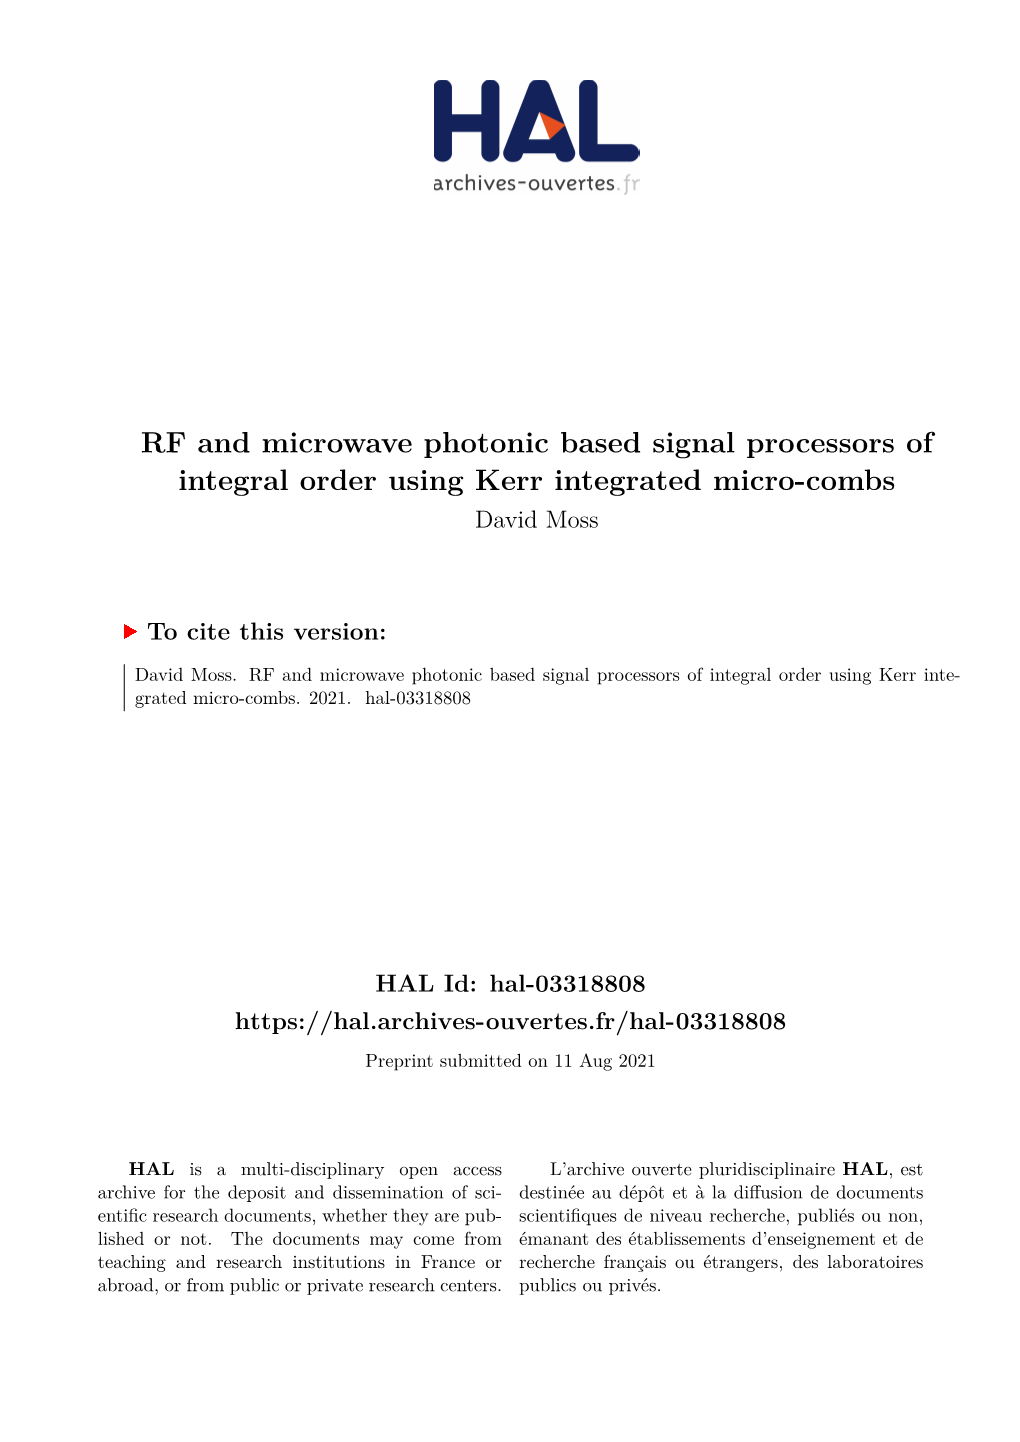 RF and Microwave Photonic Based Signal Processors of Integral Order Using Kerr Integrated Micro-Combs David Moss